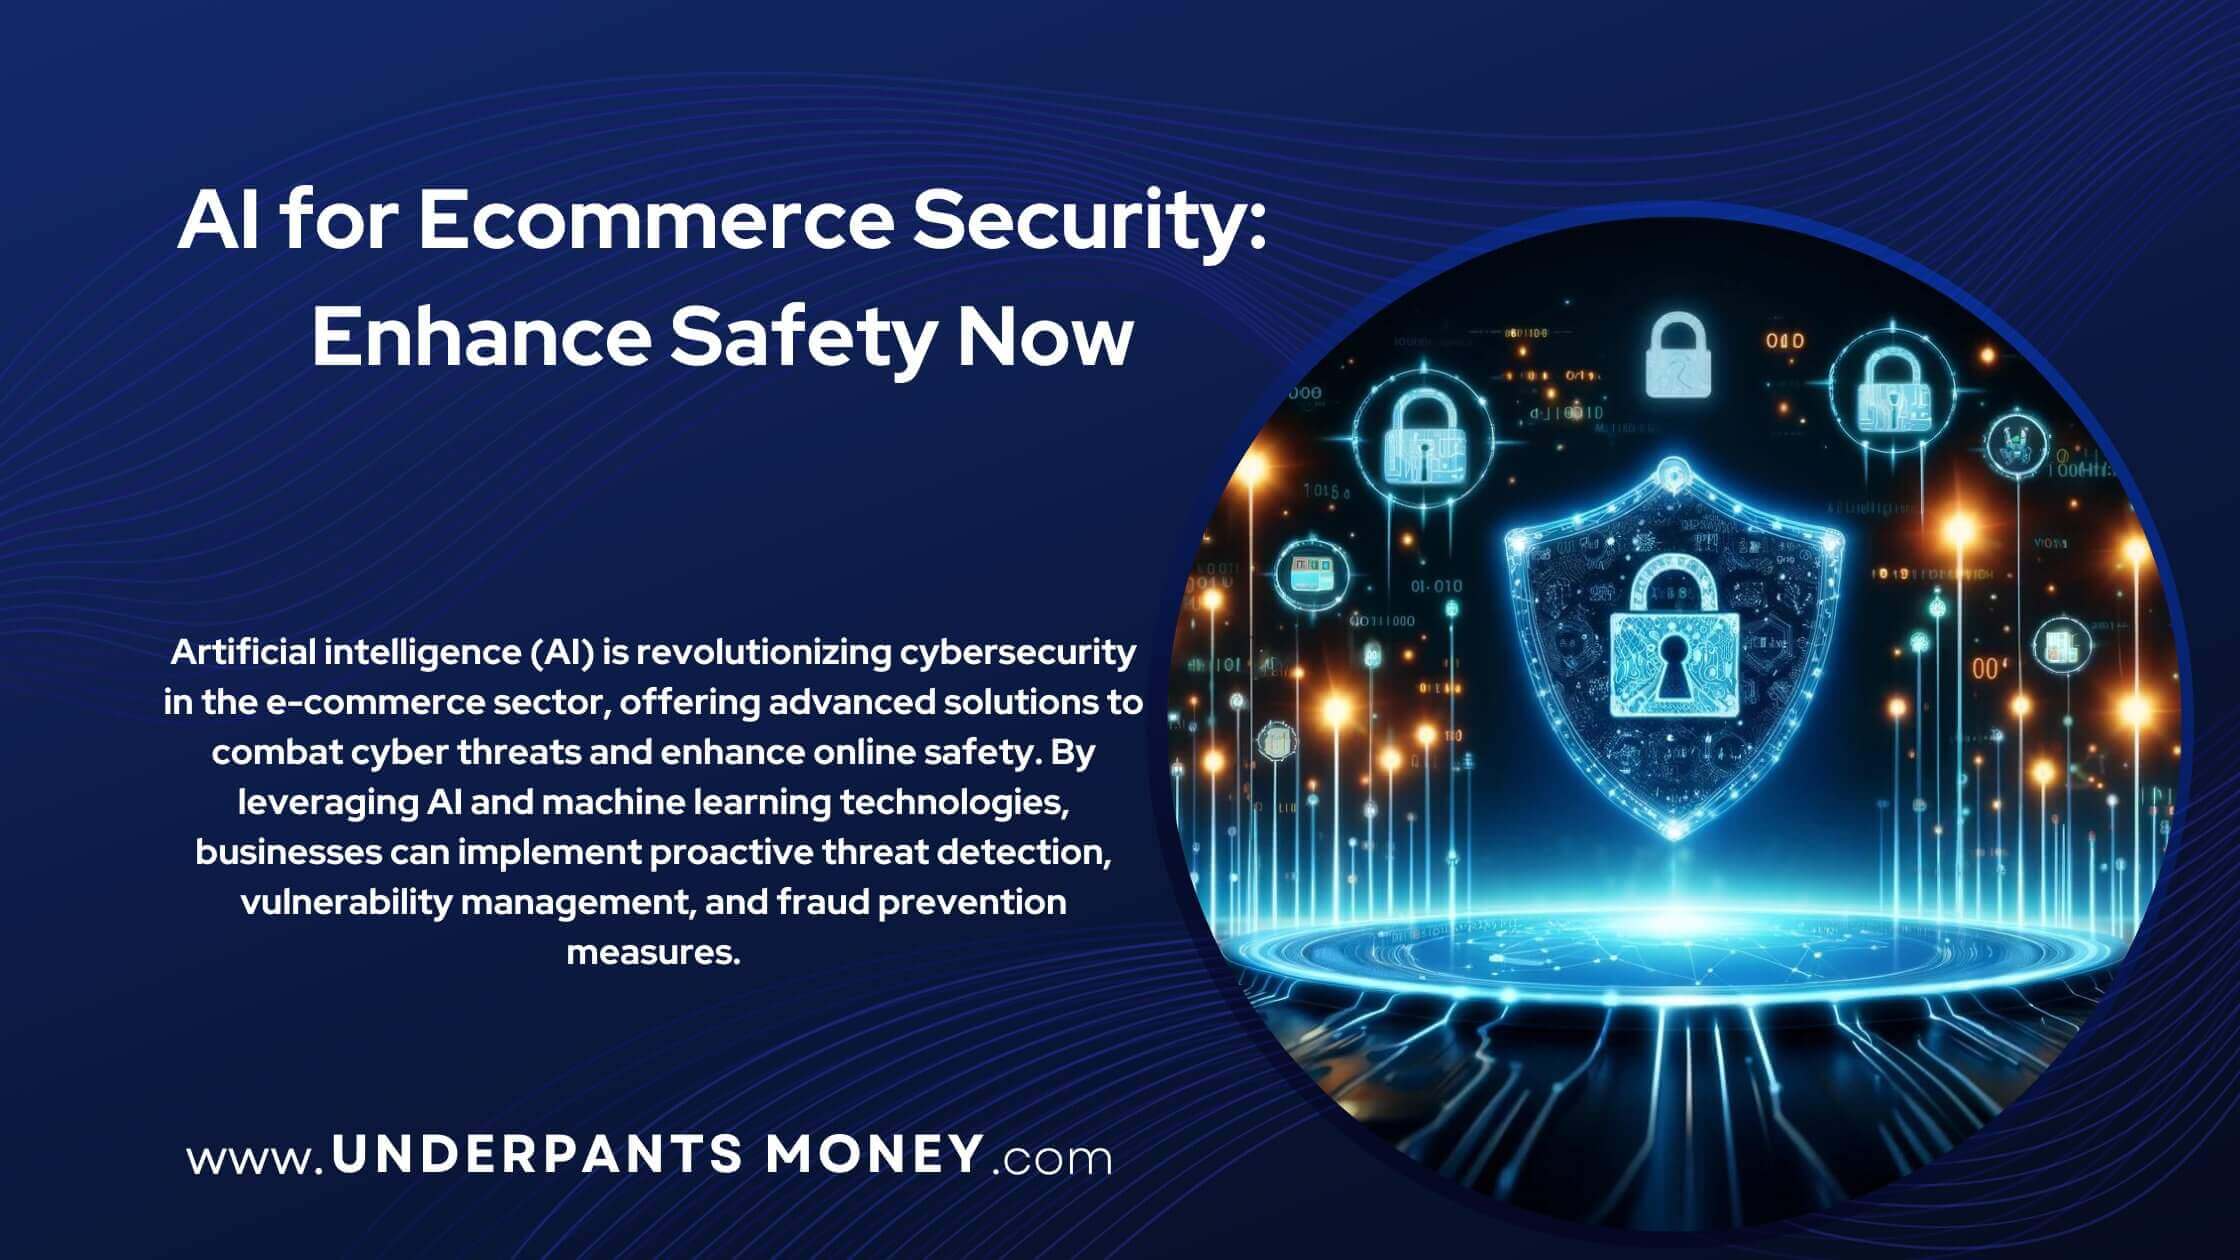 AI for ecommerce security title on blue with subtext and image of cyber security lock